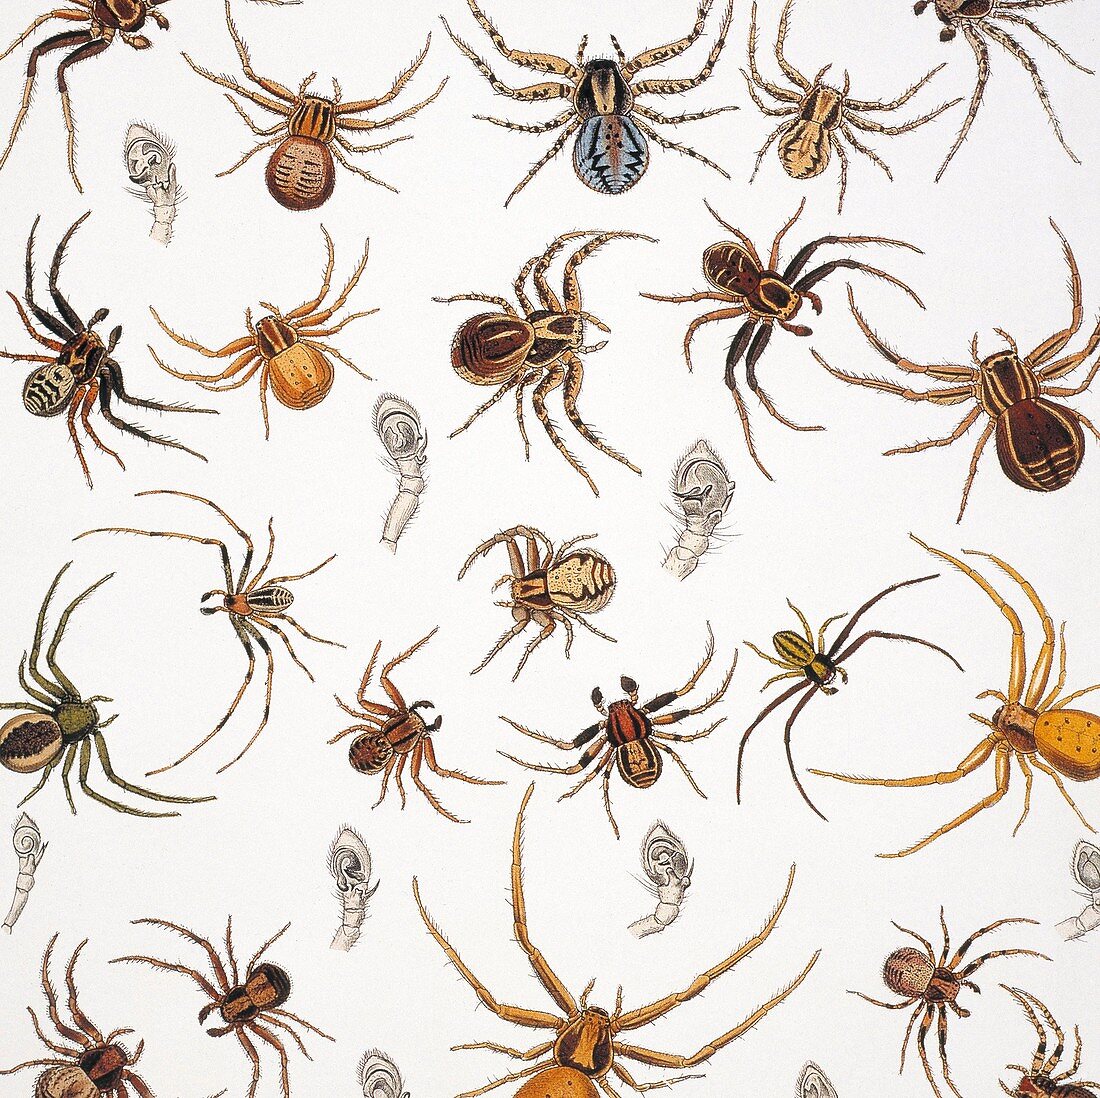 Crab spiders and scorpions,artwork